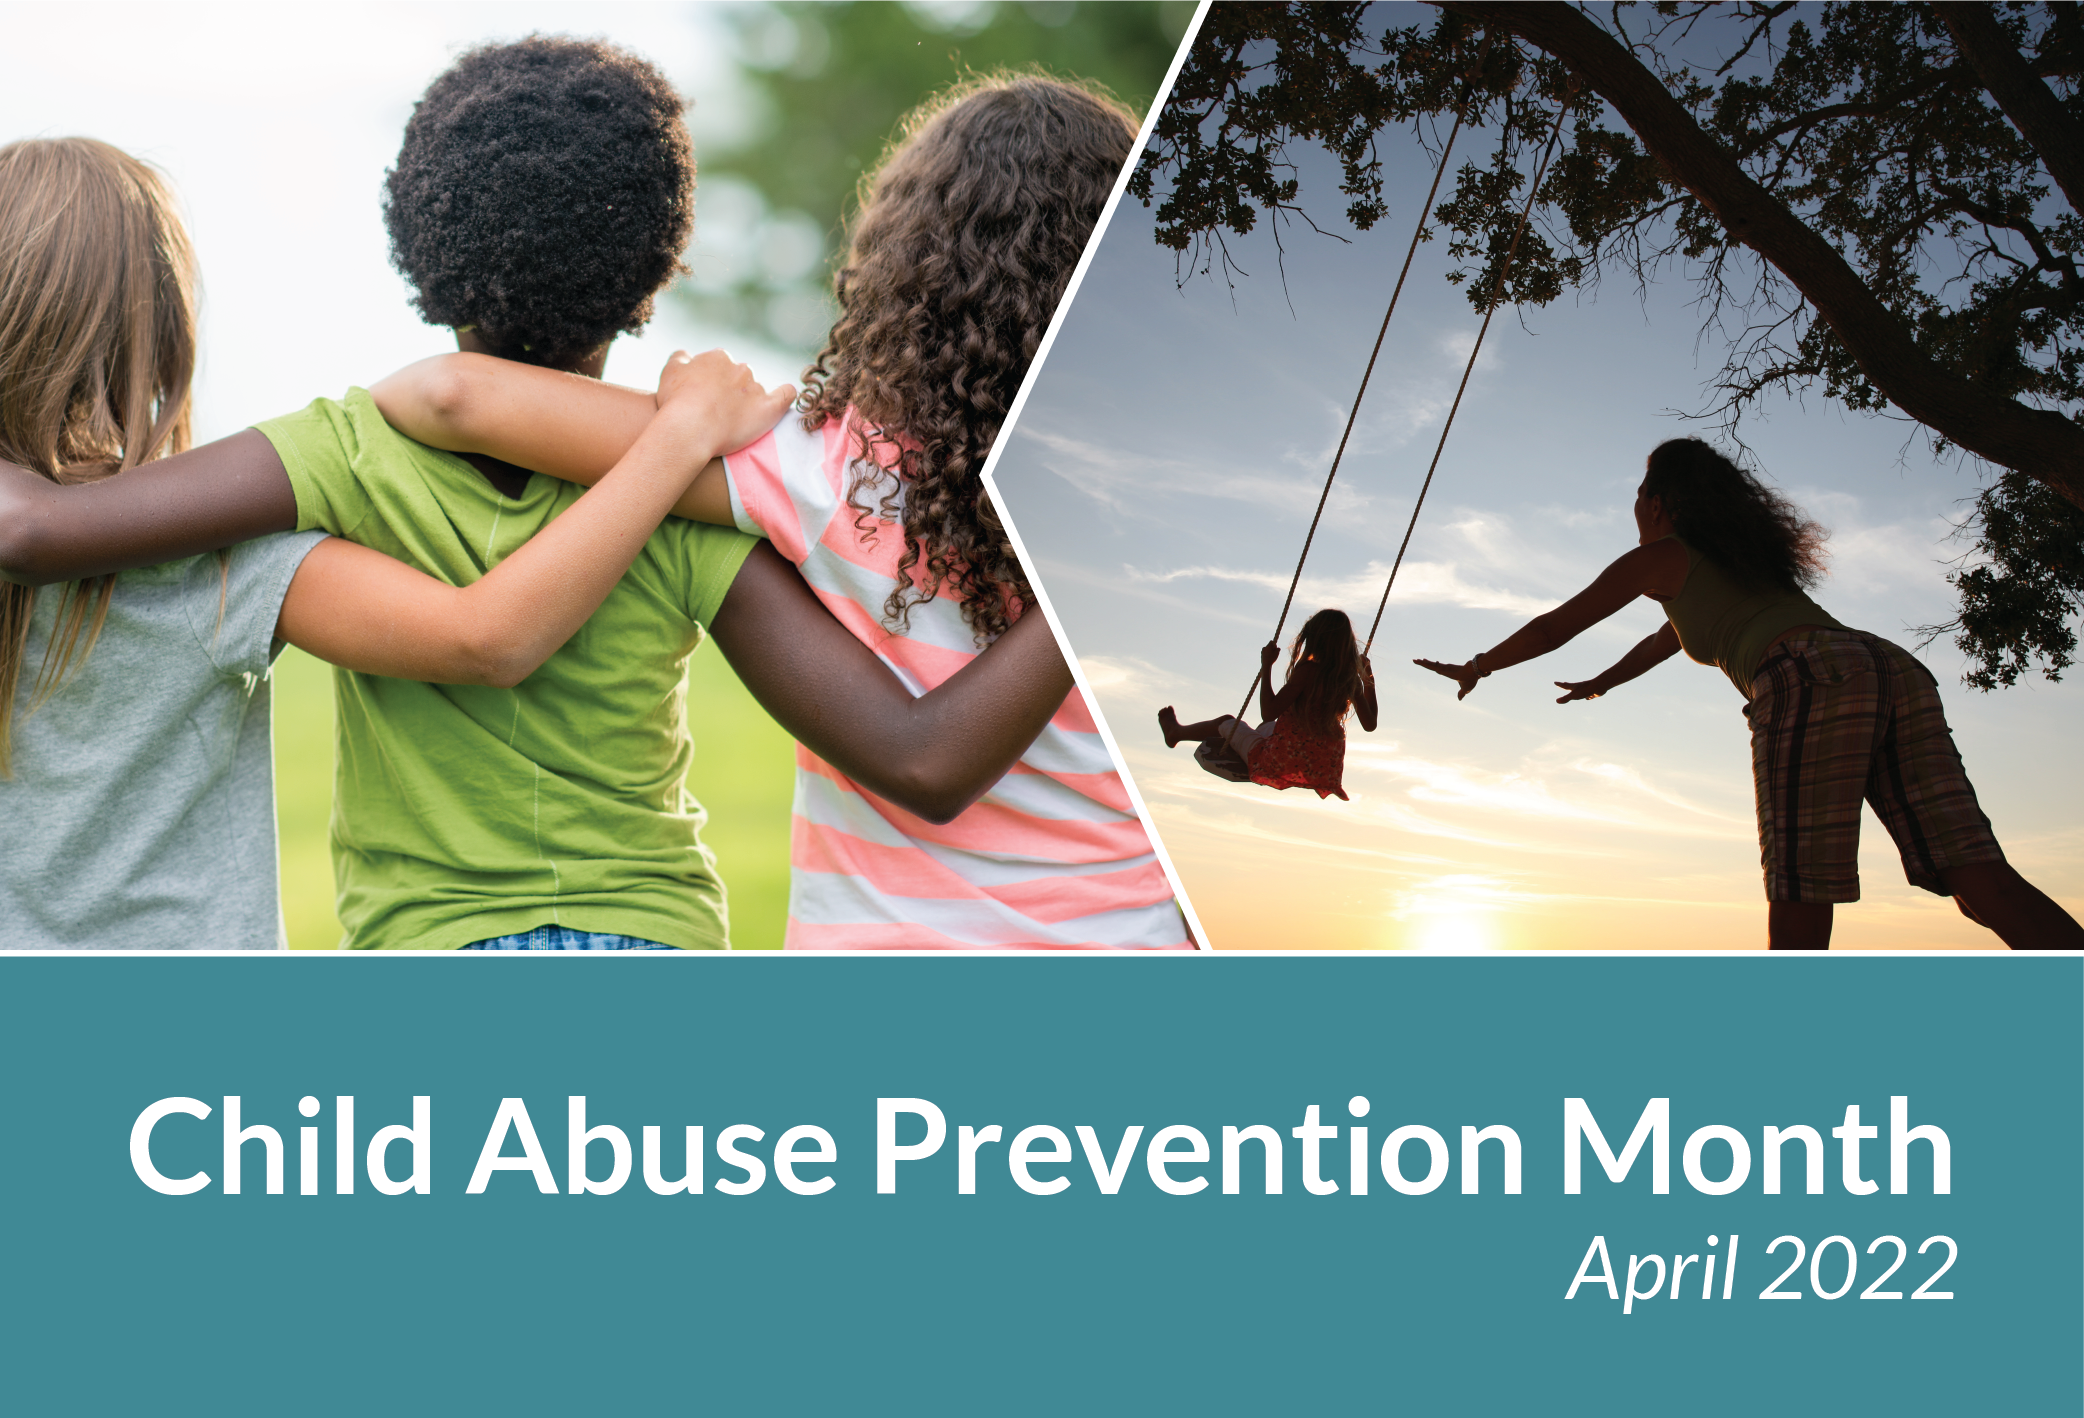 2022 Child Abuse Prevention Month Resources Image